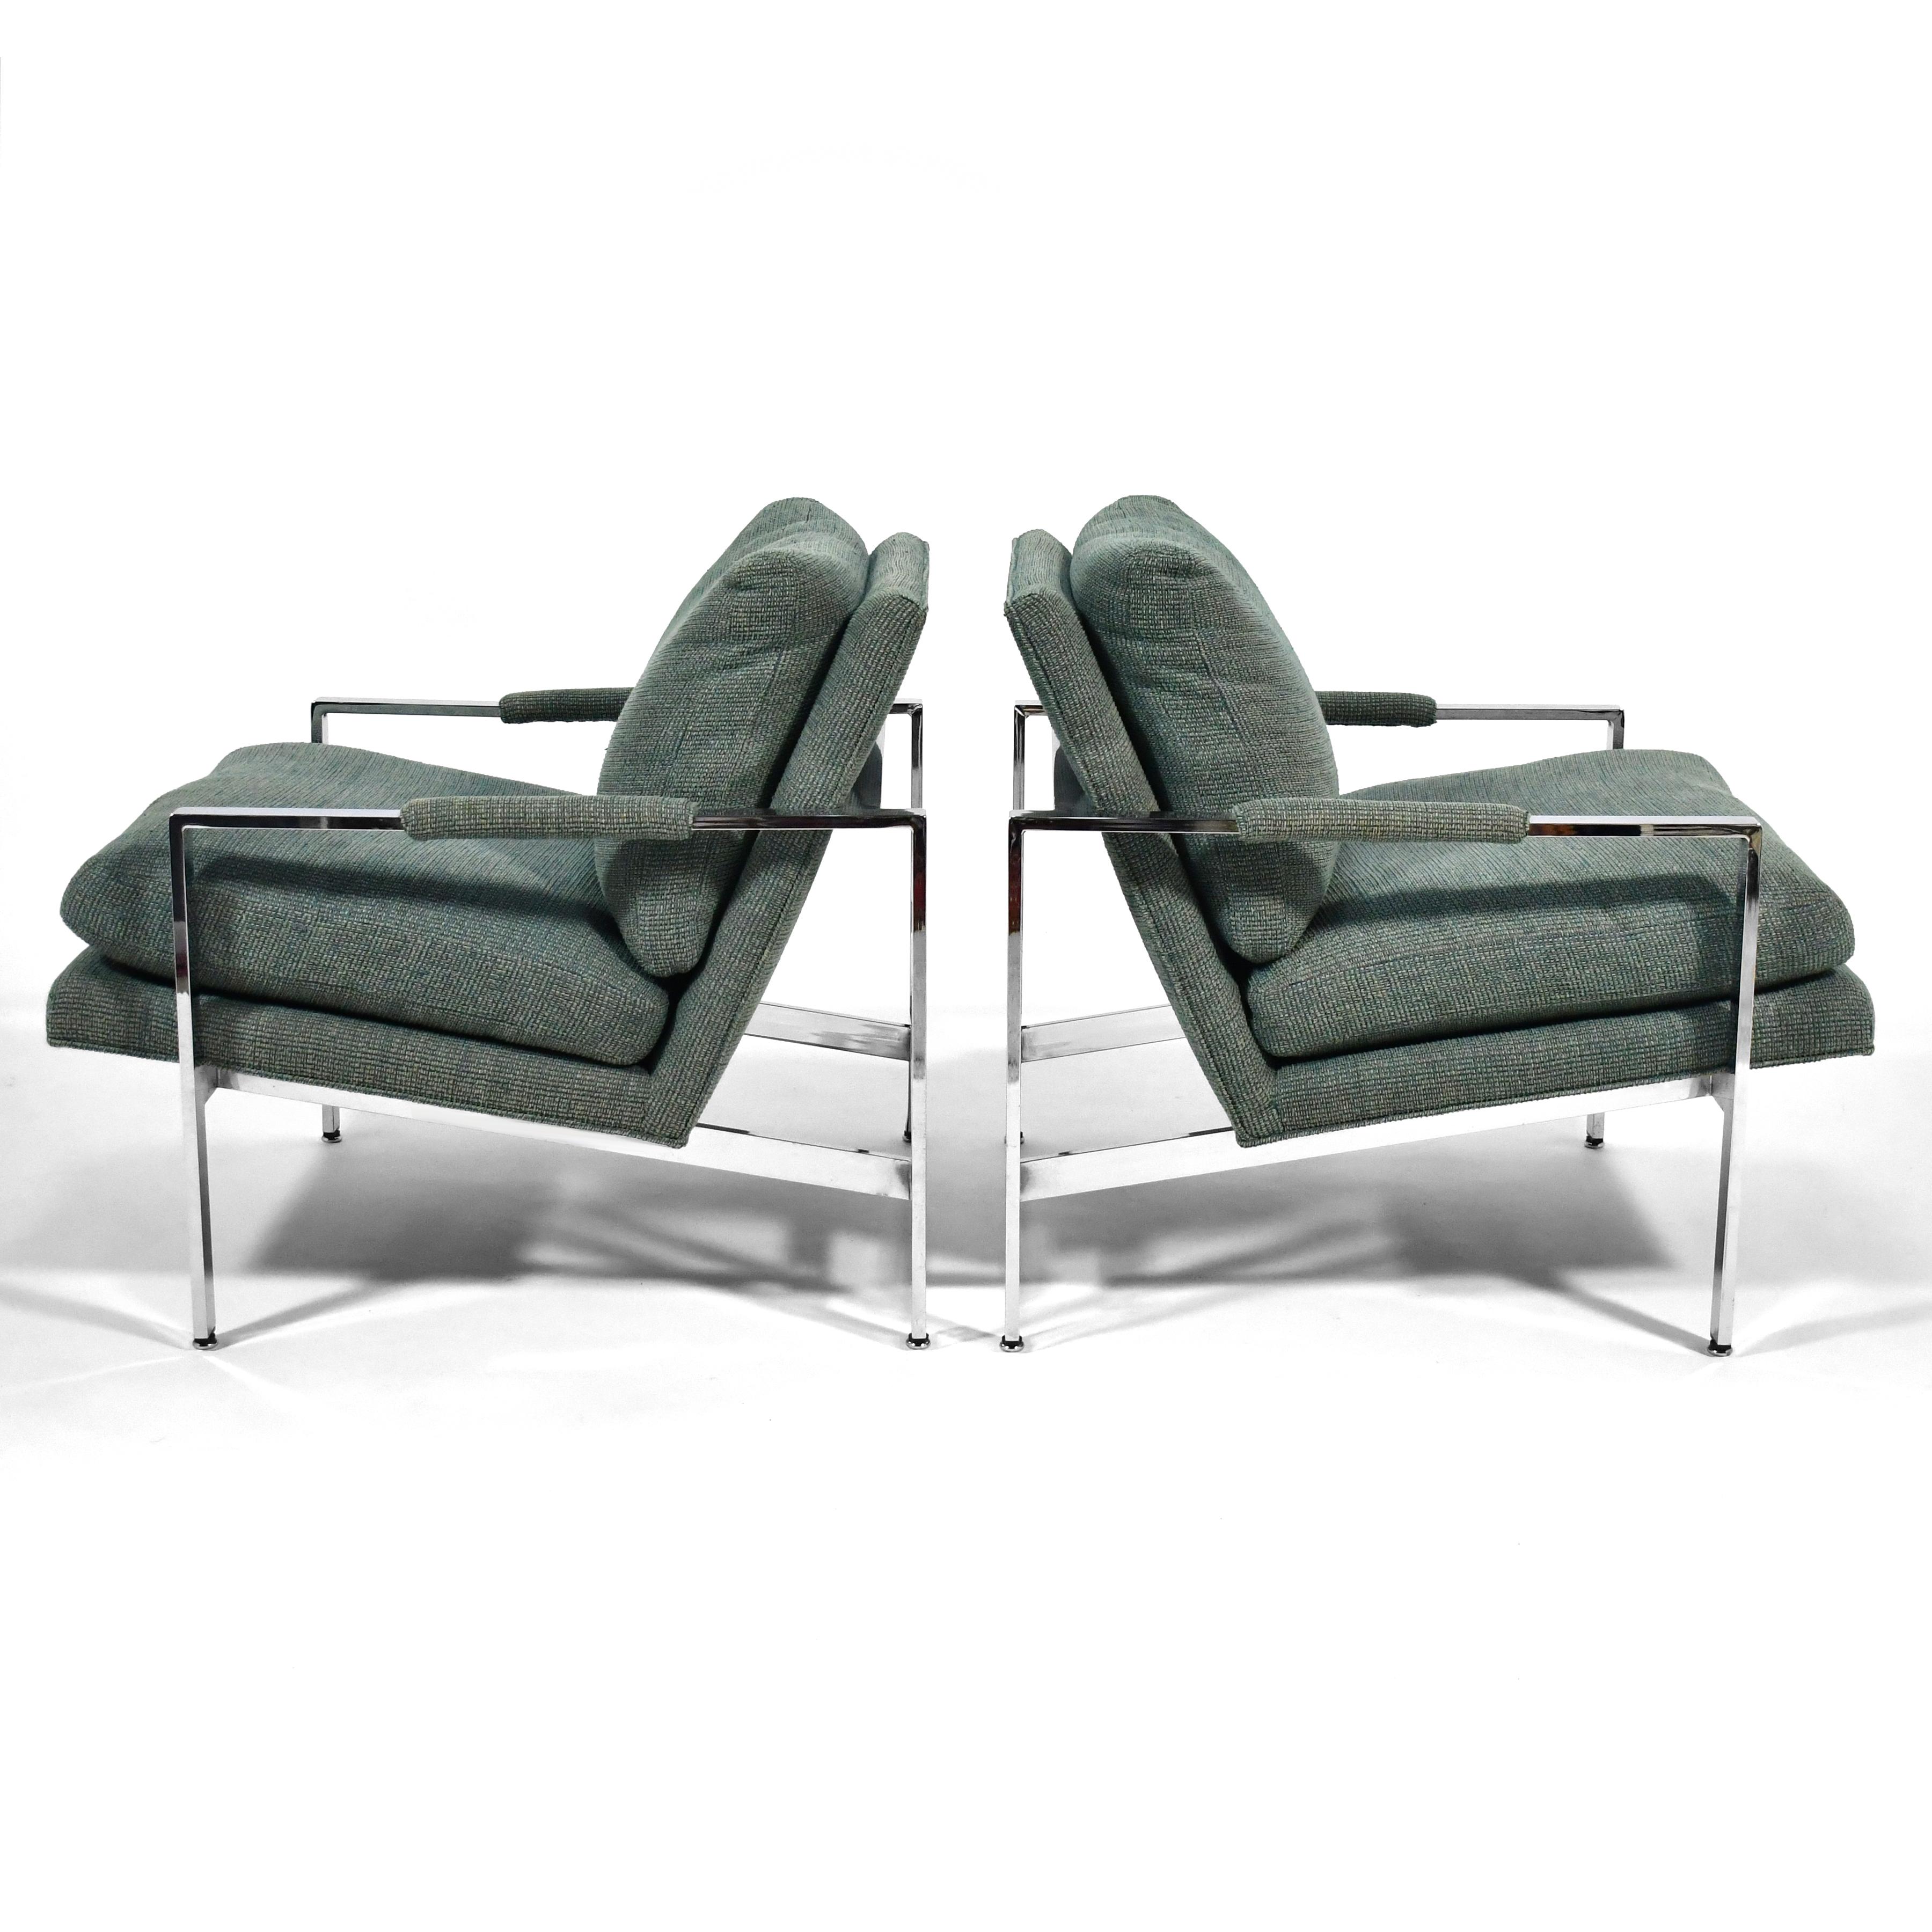 Plated Milo Baughman Pair of Lounge Chairs by Thayer Coggin